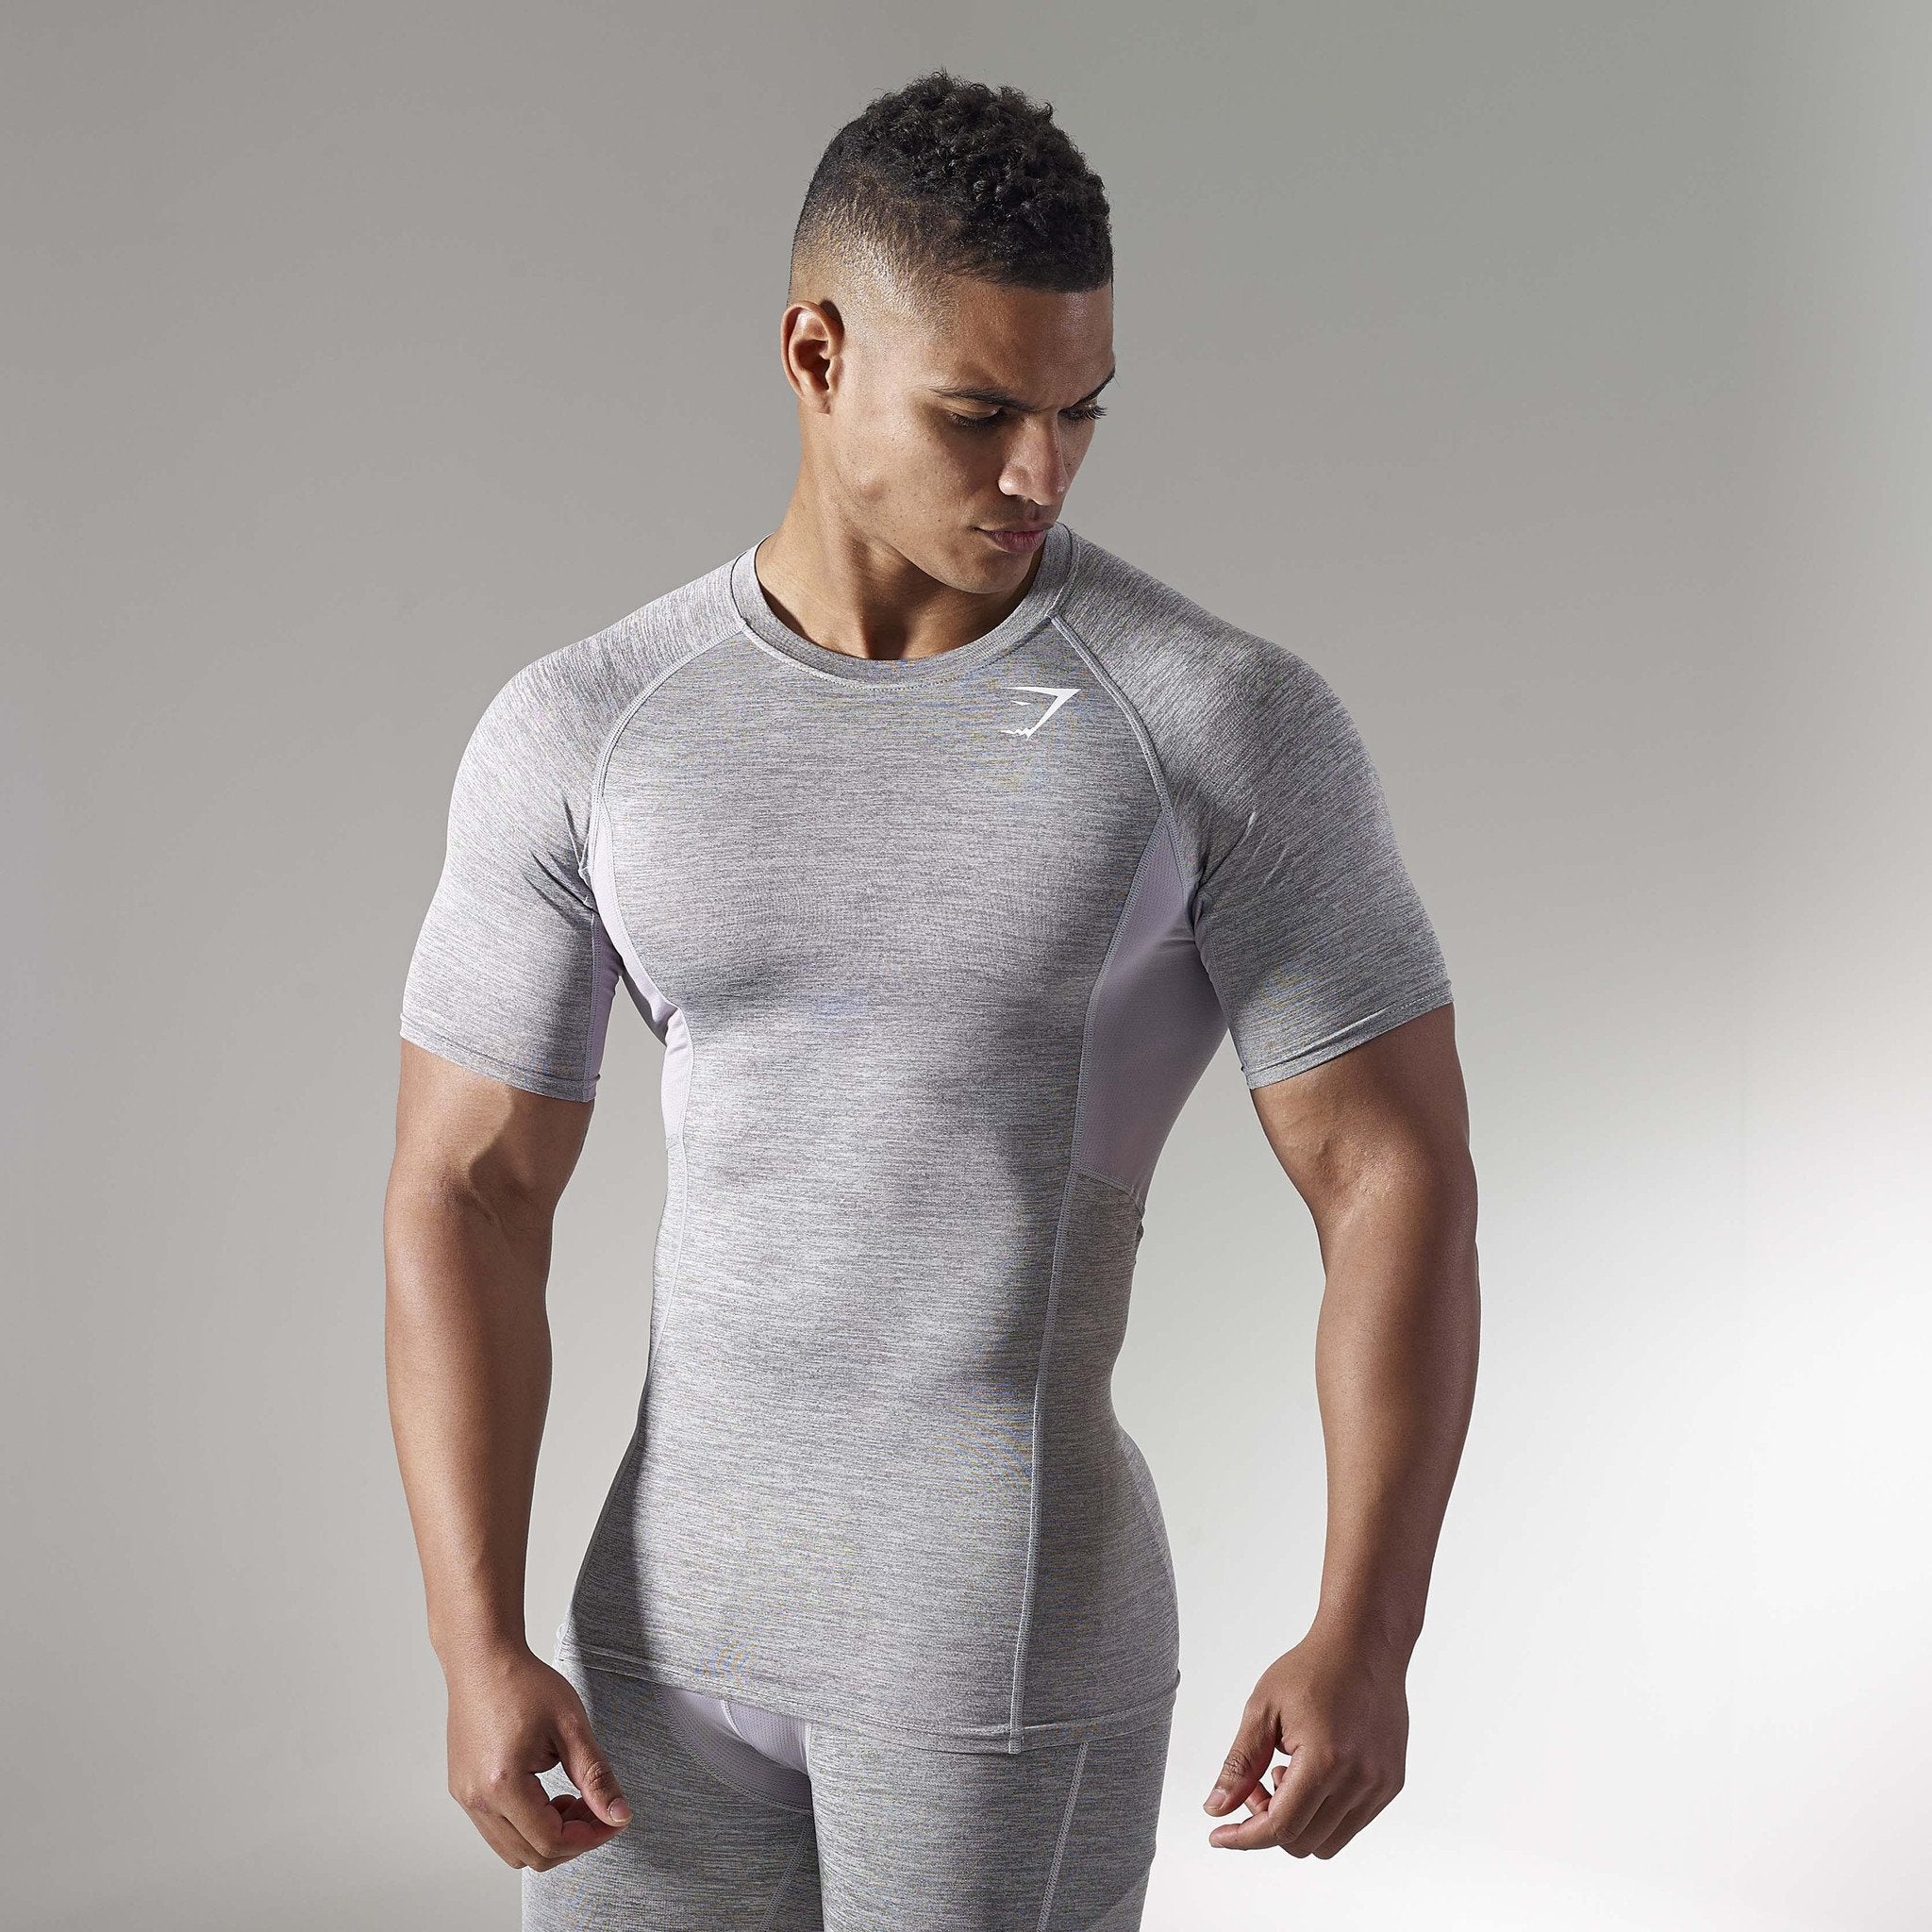 Element Baselayer Short Sleeve Top in Light Grey Marl - view 3